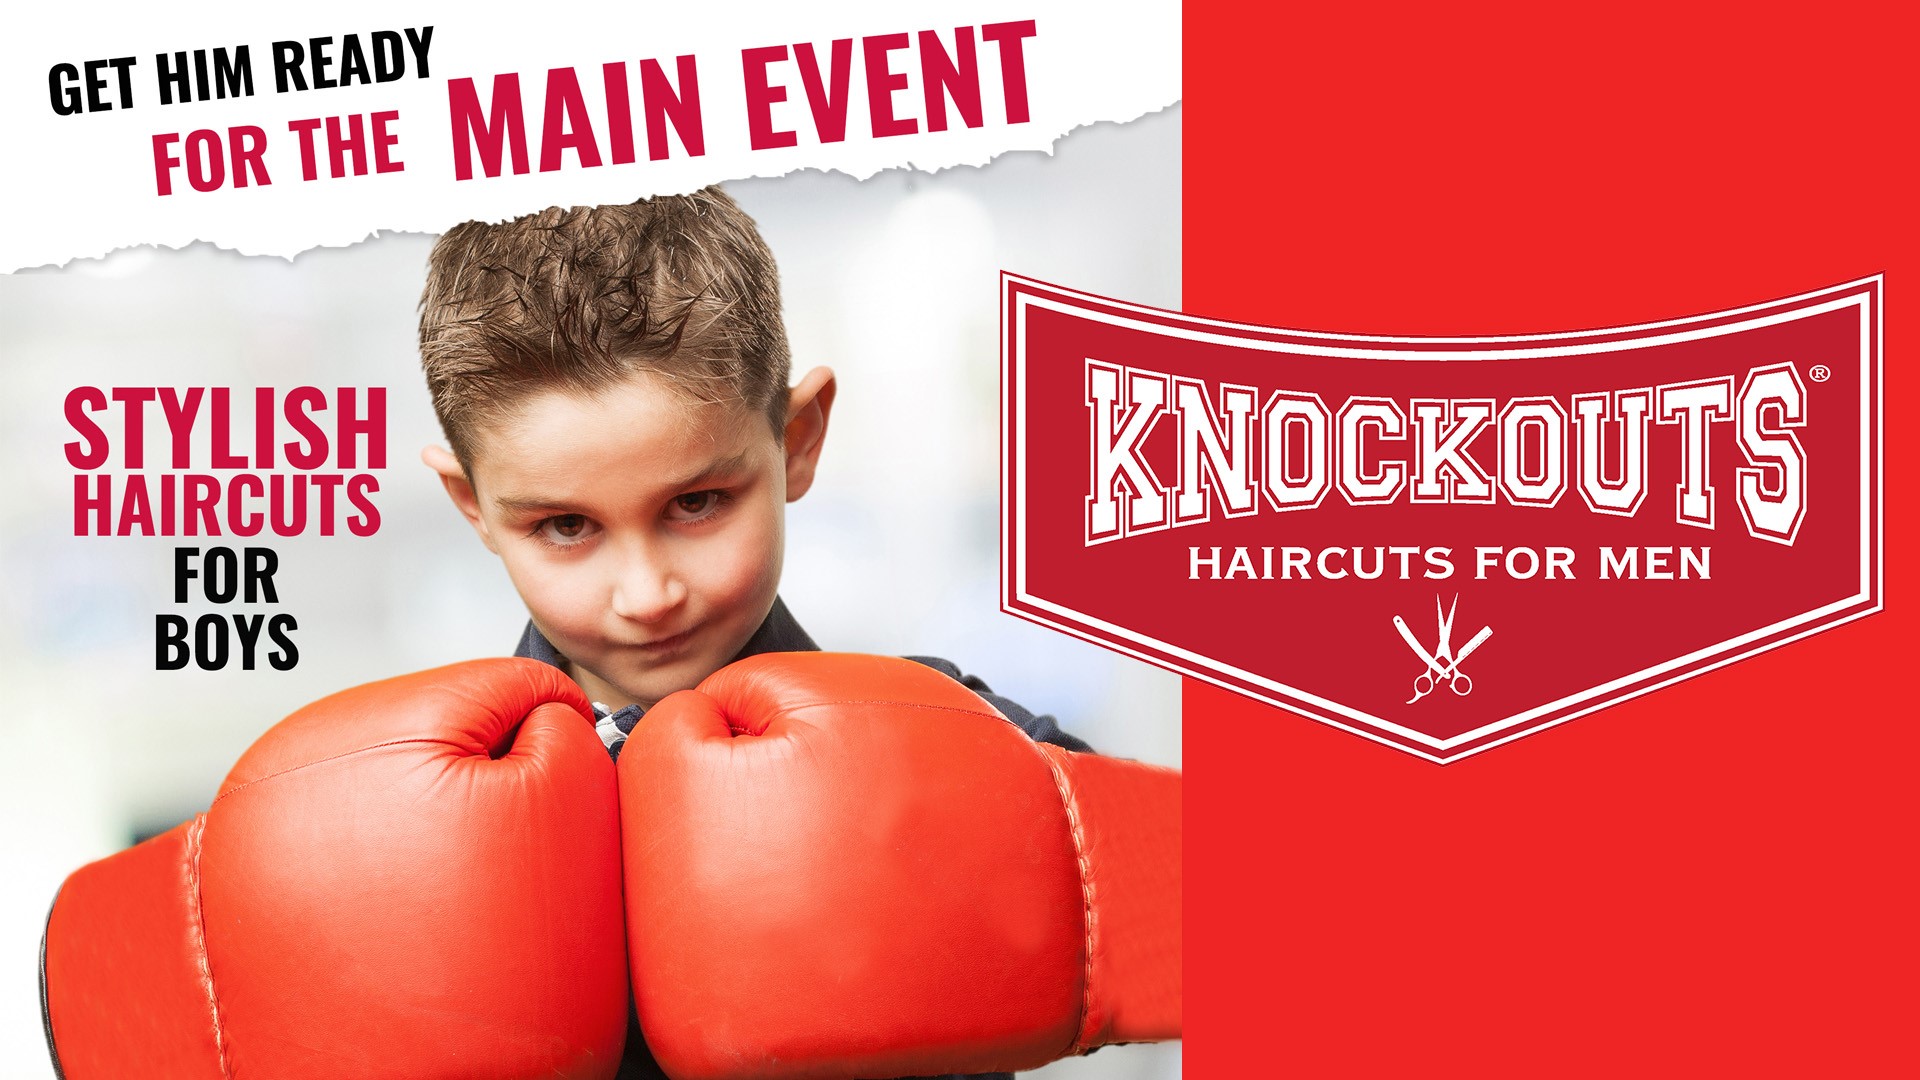 Knockouts - Haircuts and Grooming for Men